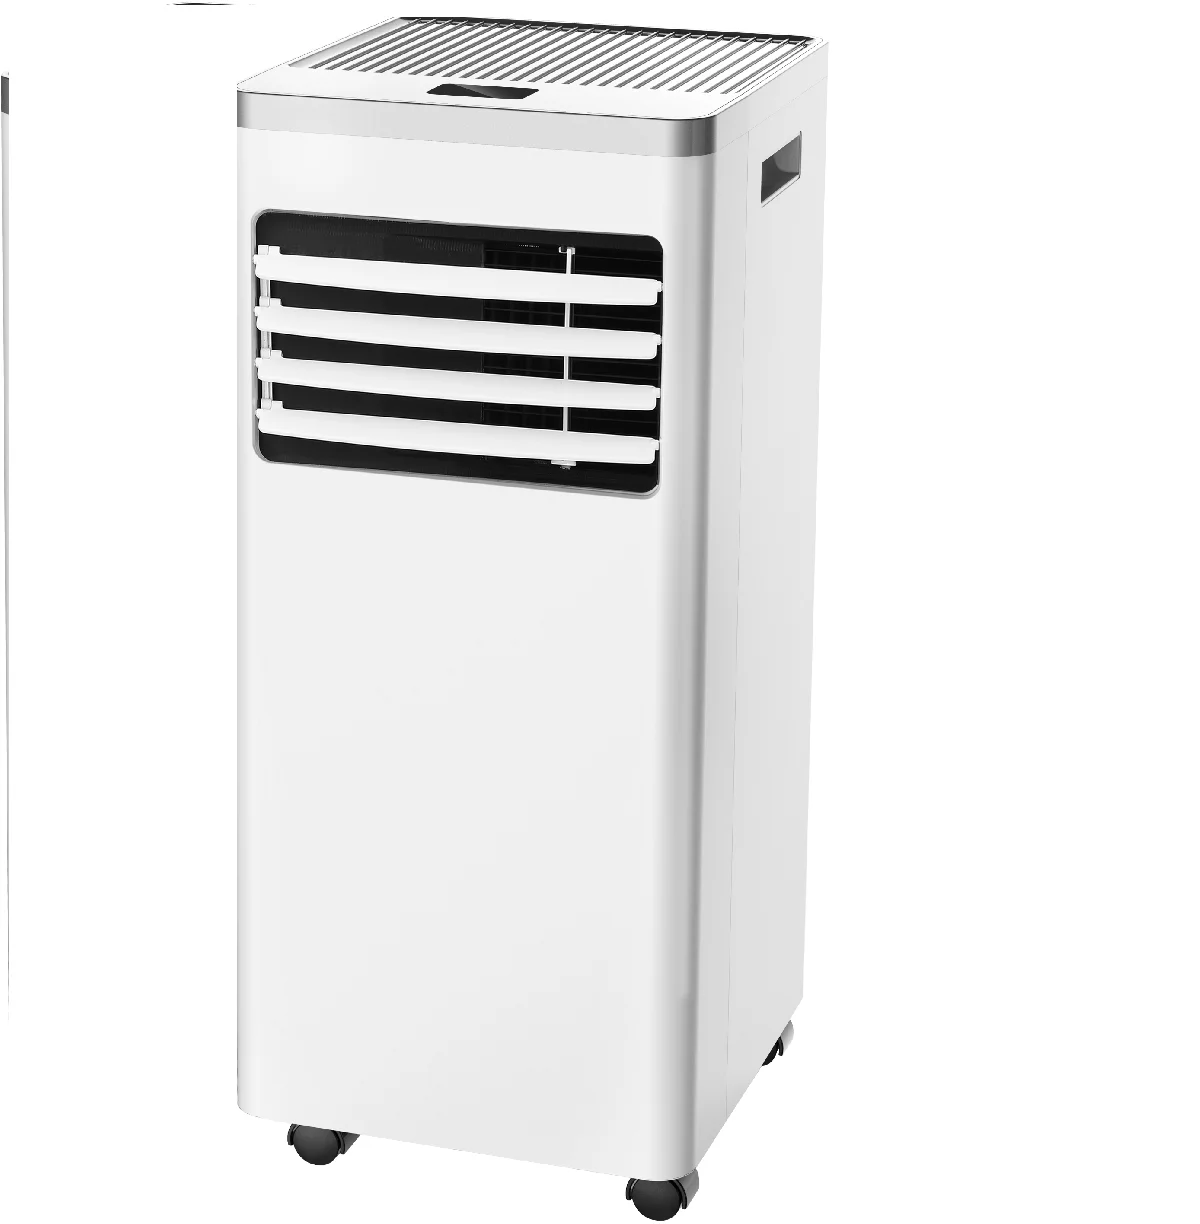 9000 Btu Portable Ac Unit Small Window Type Smart Wifi Control Refrigeration Moving Portable Air Conditioner With Compressor